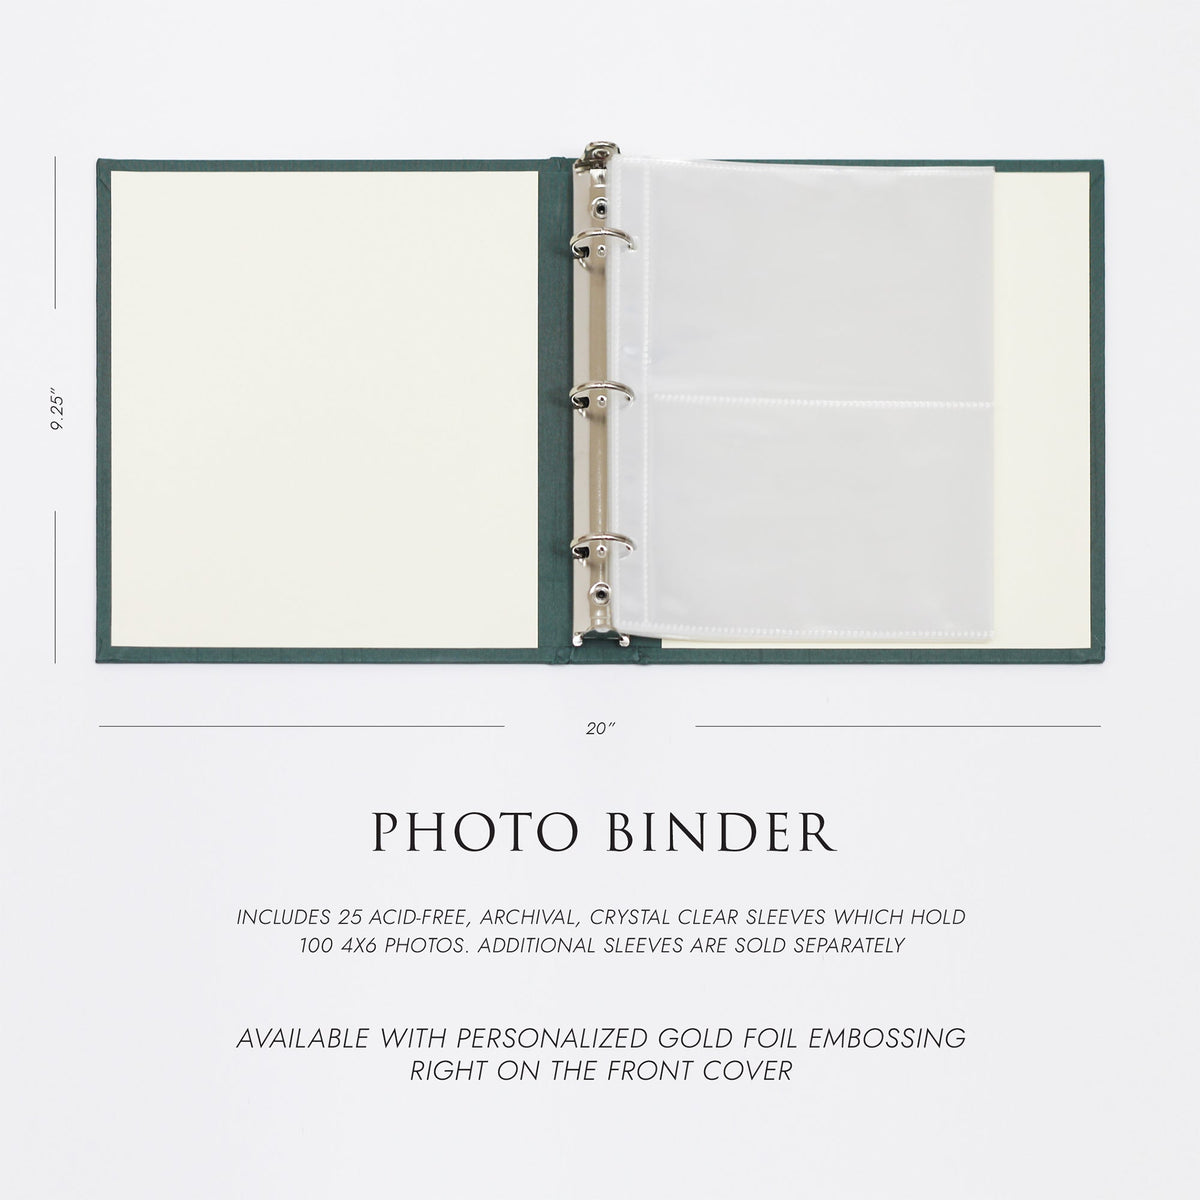 Medium Photo Binder For 4x6 Photos | Cover: Mango Cotton | Available Personalized